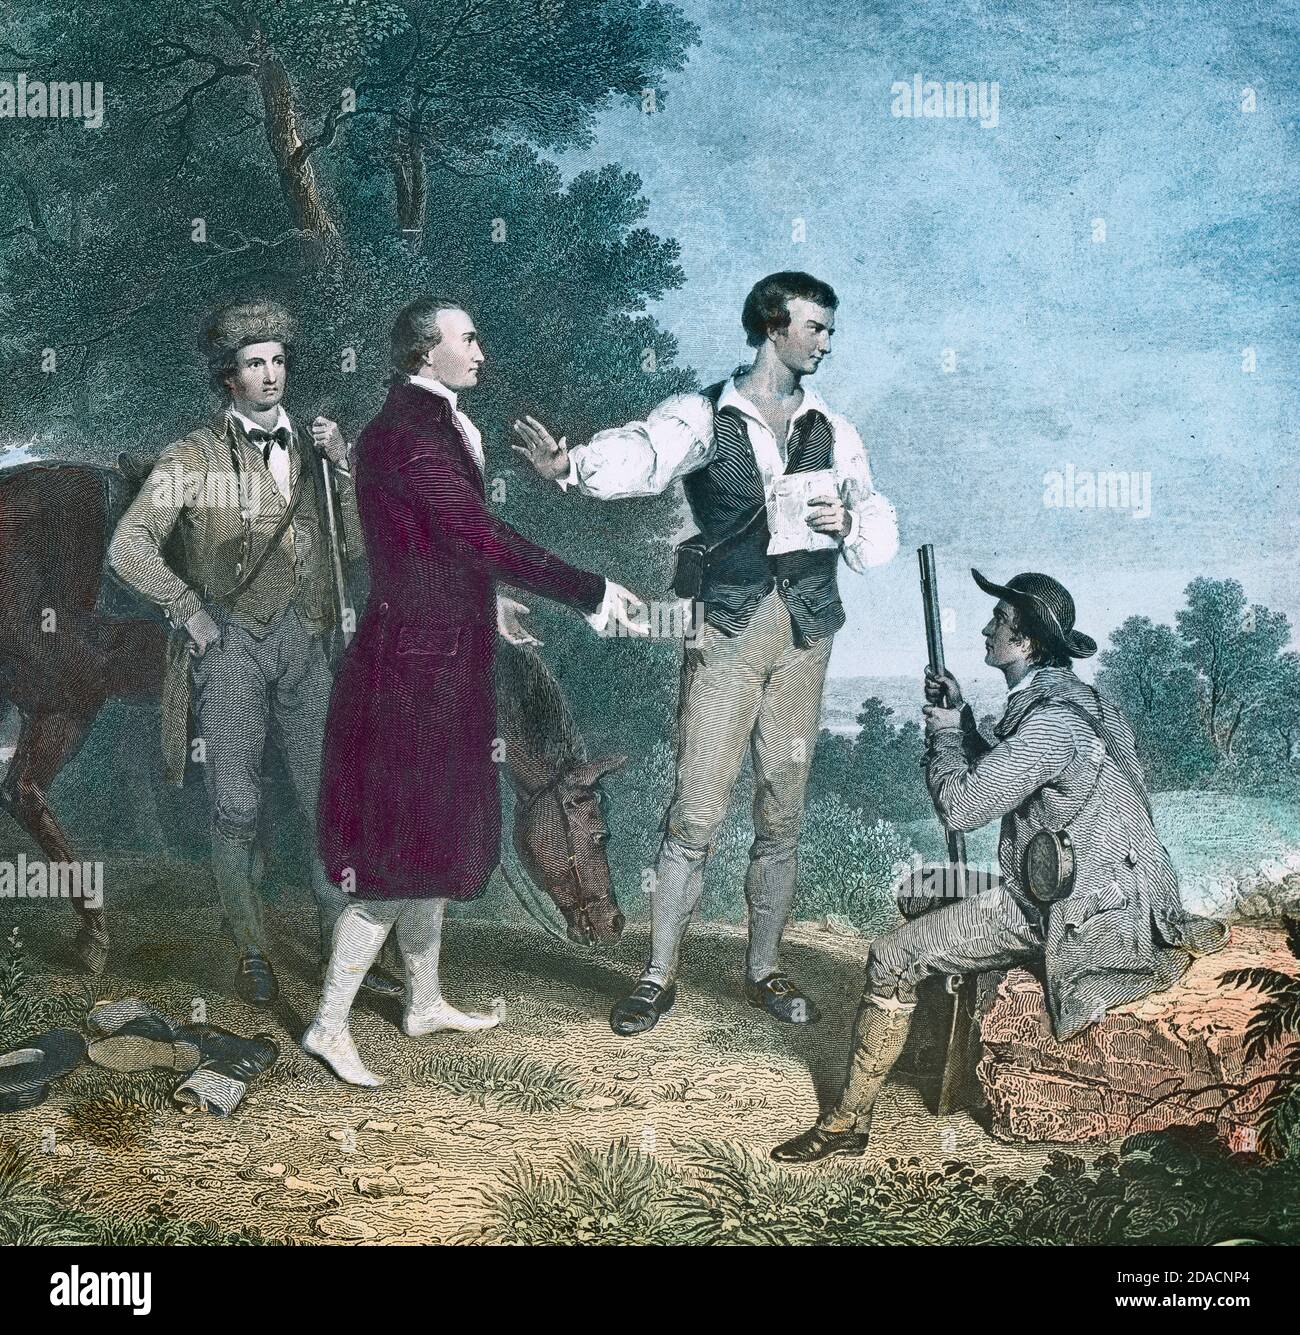 Antique hand-colored engraving, “The Capture of Major André” after painting by Asher Brown Durand. John André (1751-1780) was a major in the British Army and head of its Secret Service in America during the American Revolutionary War. He was hanged as a spy by the Continental Army for assisting Benedict Arnold's attempted surrender of the fort at West Point, New York, to the British. SOURCE: ANTIQUE GLASS SLIDE Stock Photo